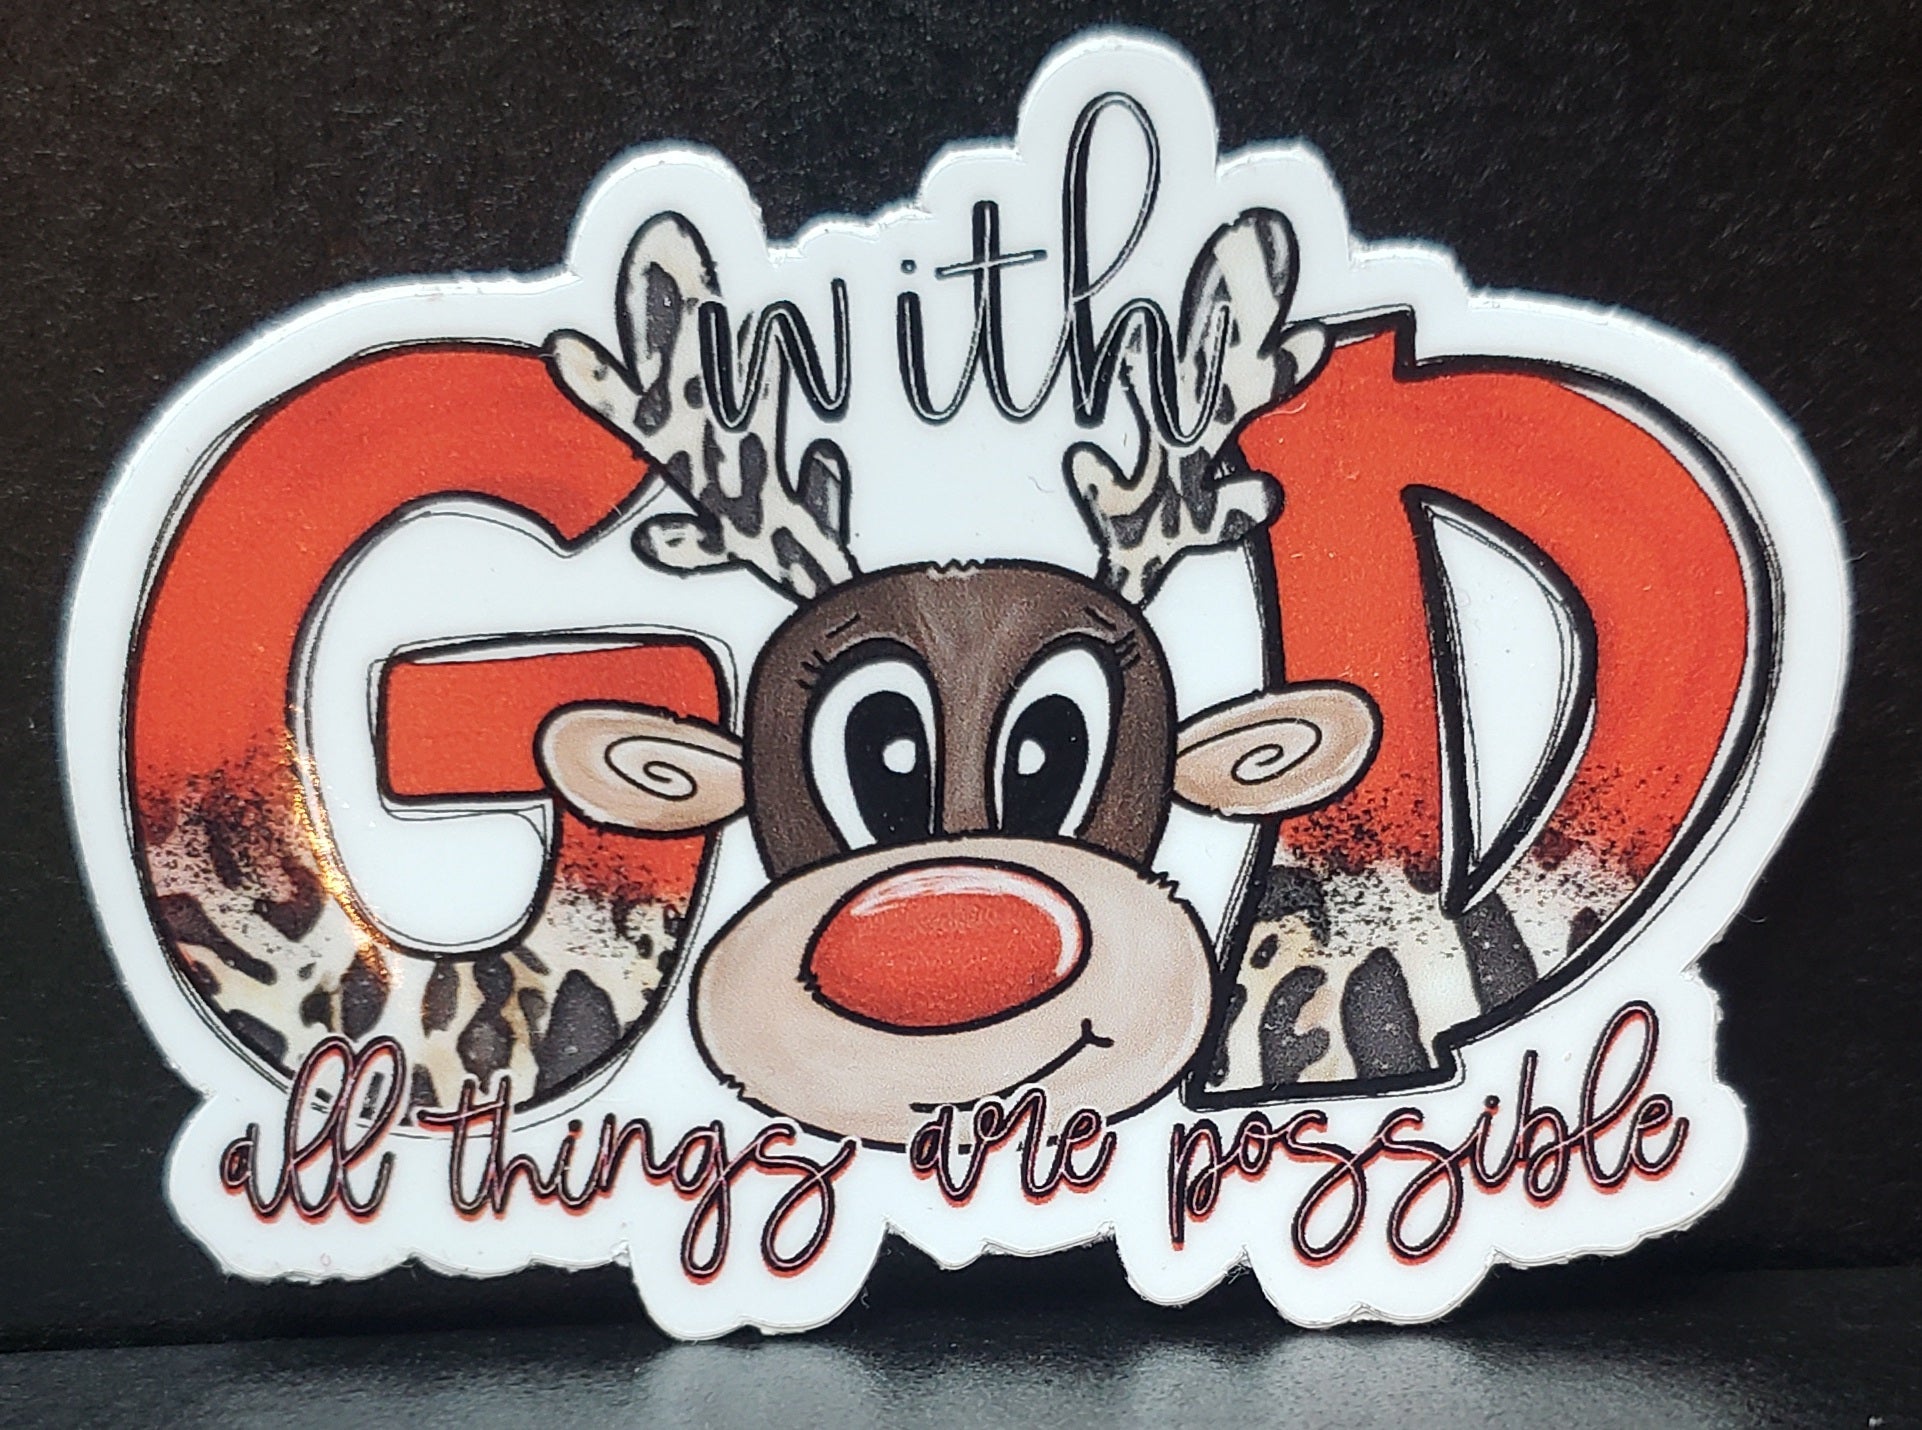 With God All Things Are Possible - Vinyl Sticker Decal